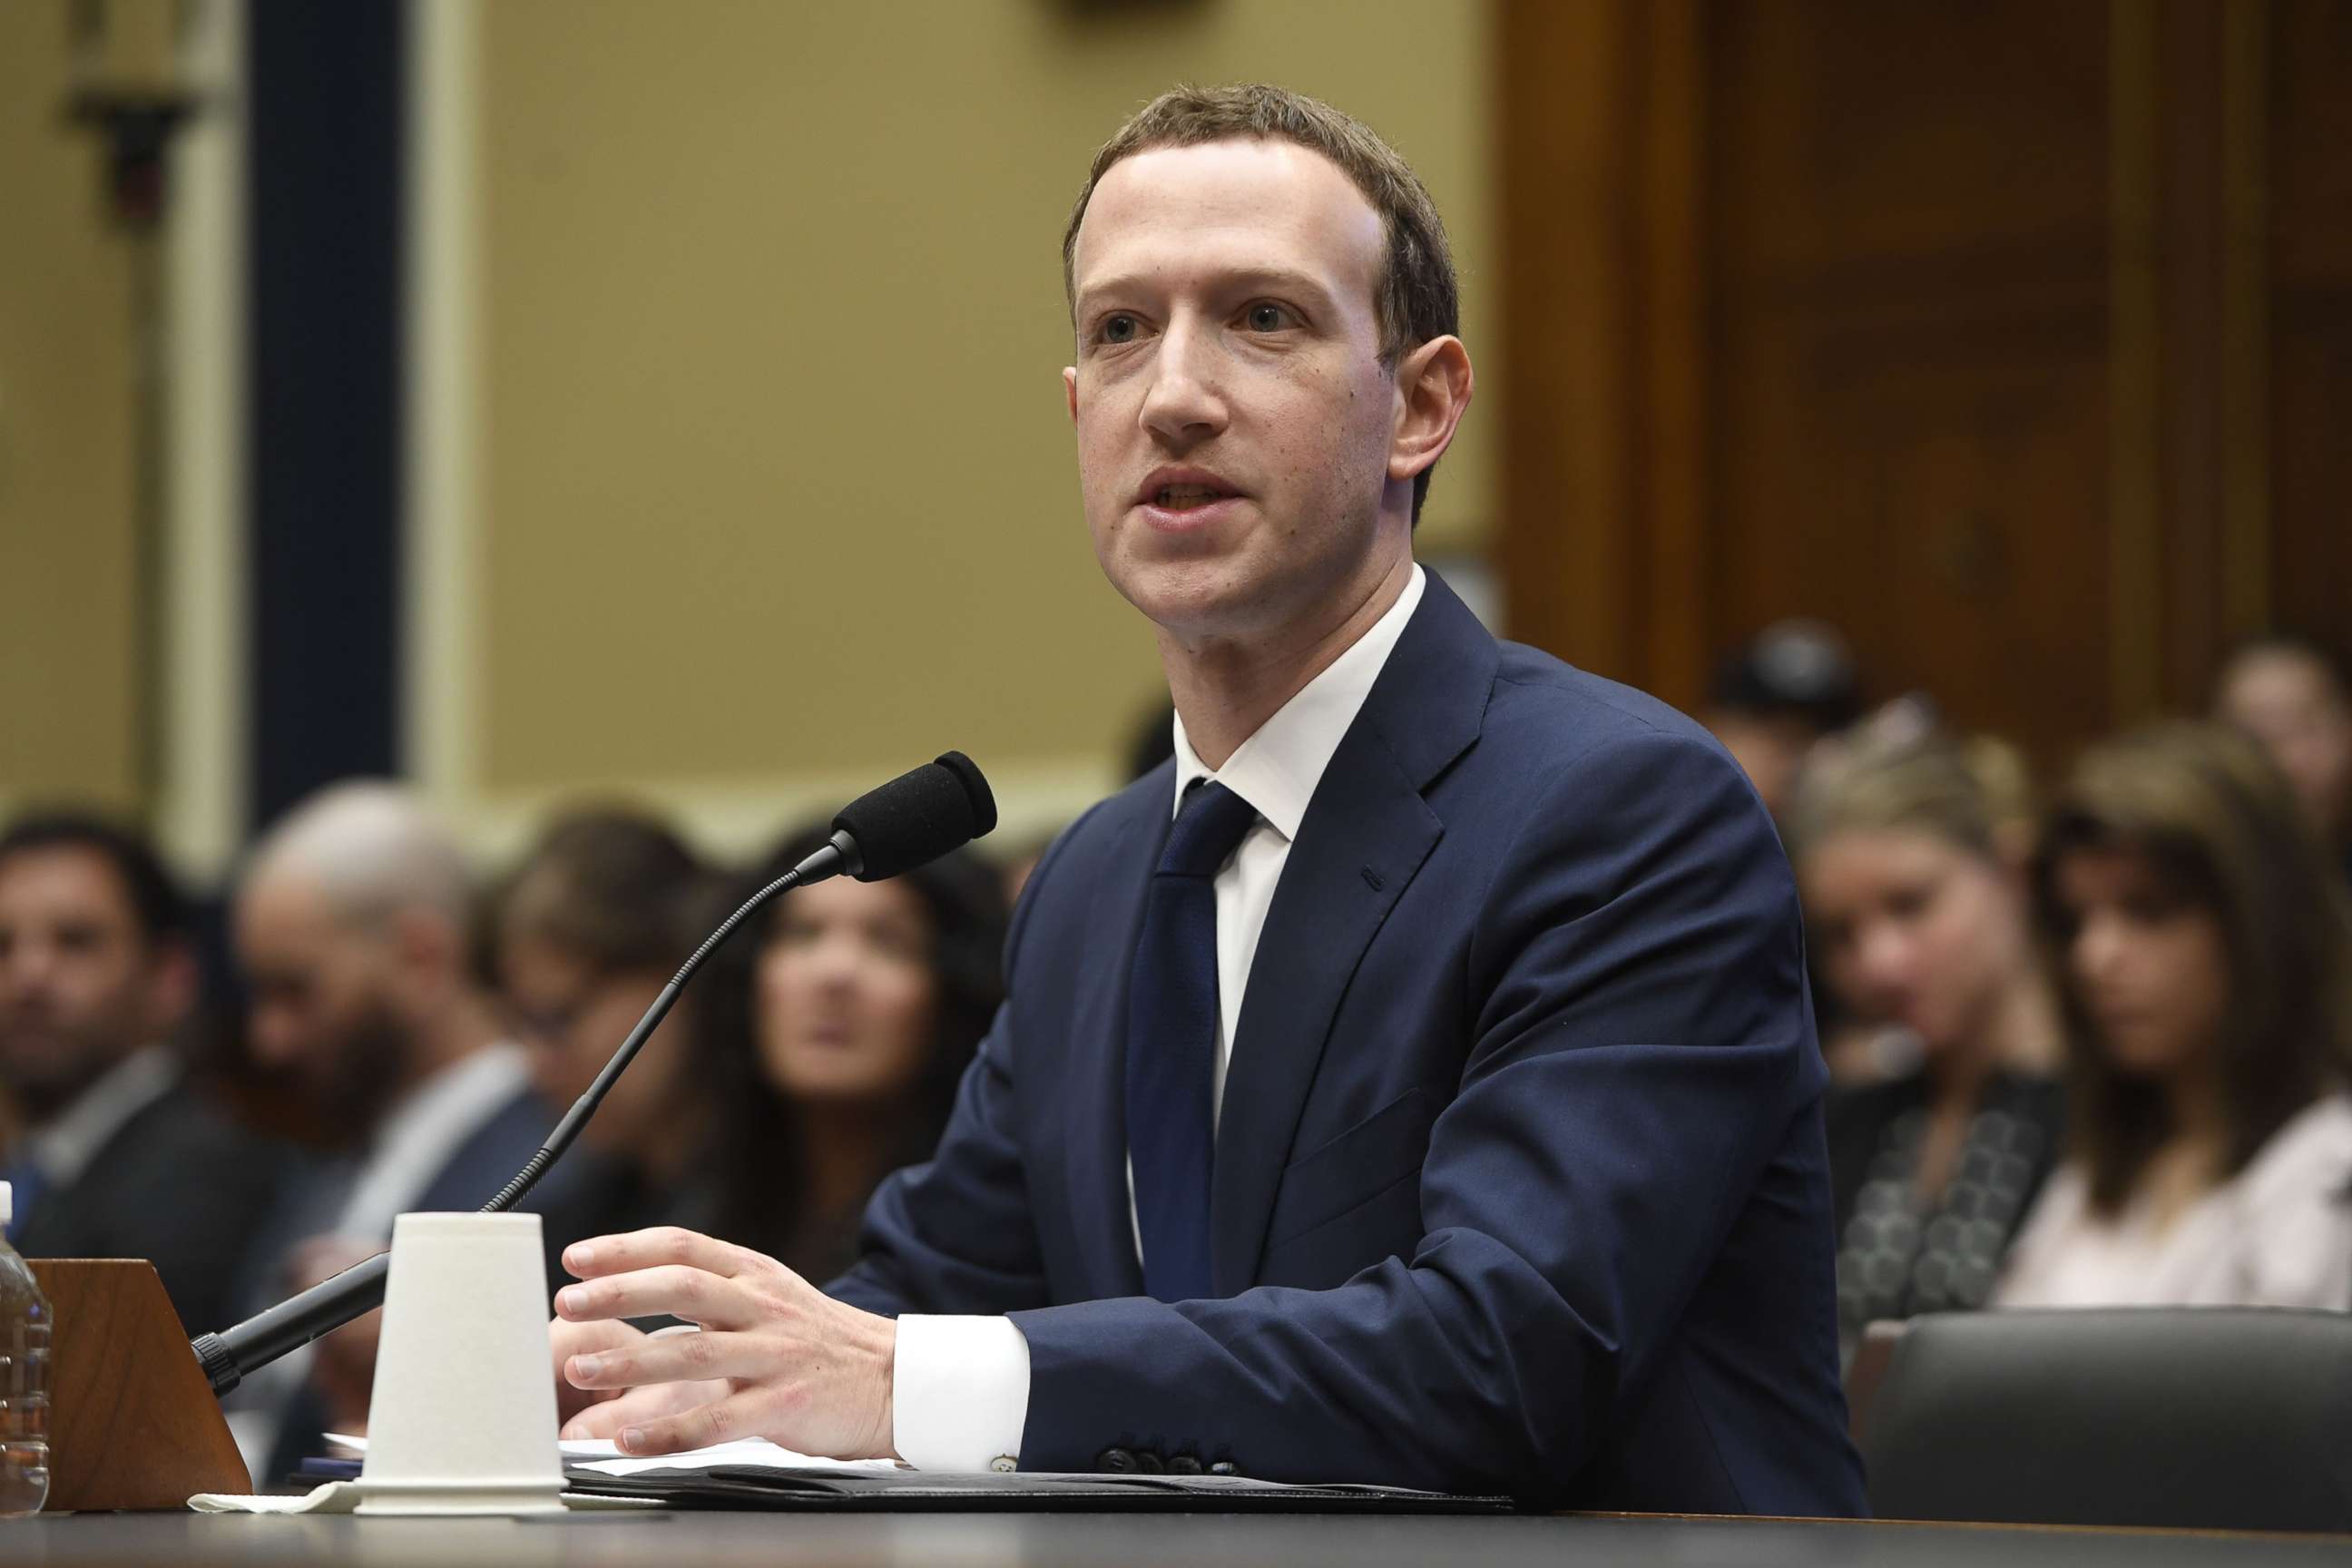 PHOTO: Facebook CEO and founder Mark Zuckerberg testifies during a U.S. House Committee on Energy and Commerce hearing about Facebook on Capitol Hill in Washington, D.C., April 11, 2018.